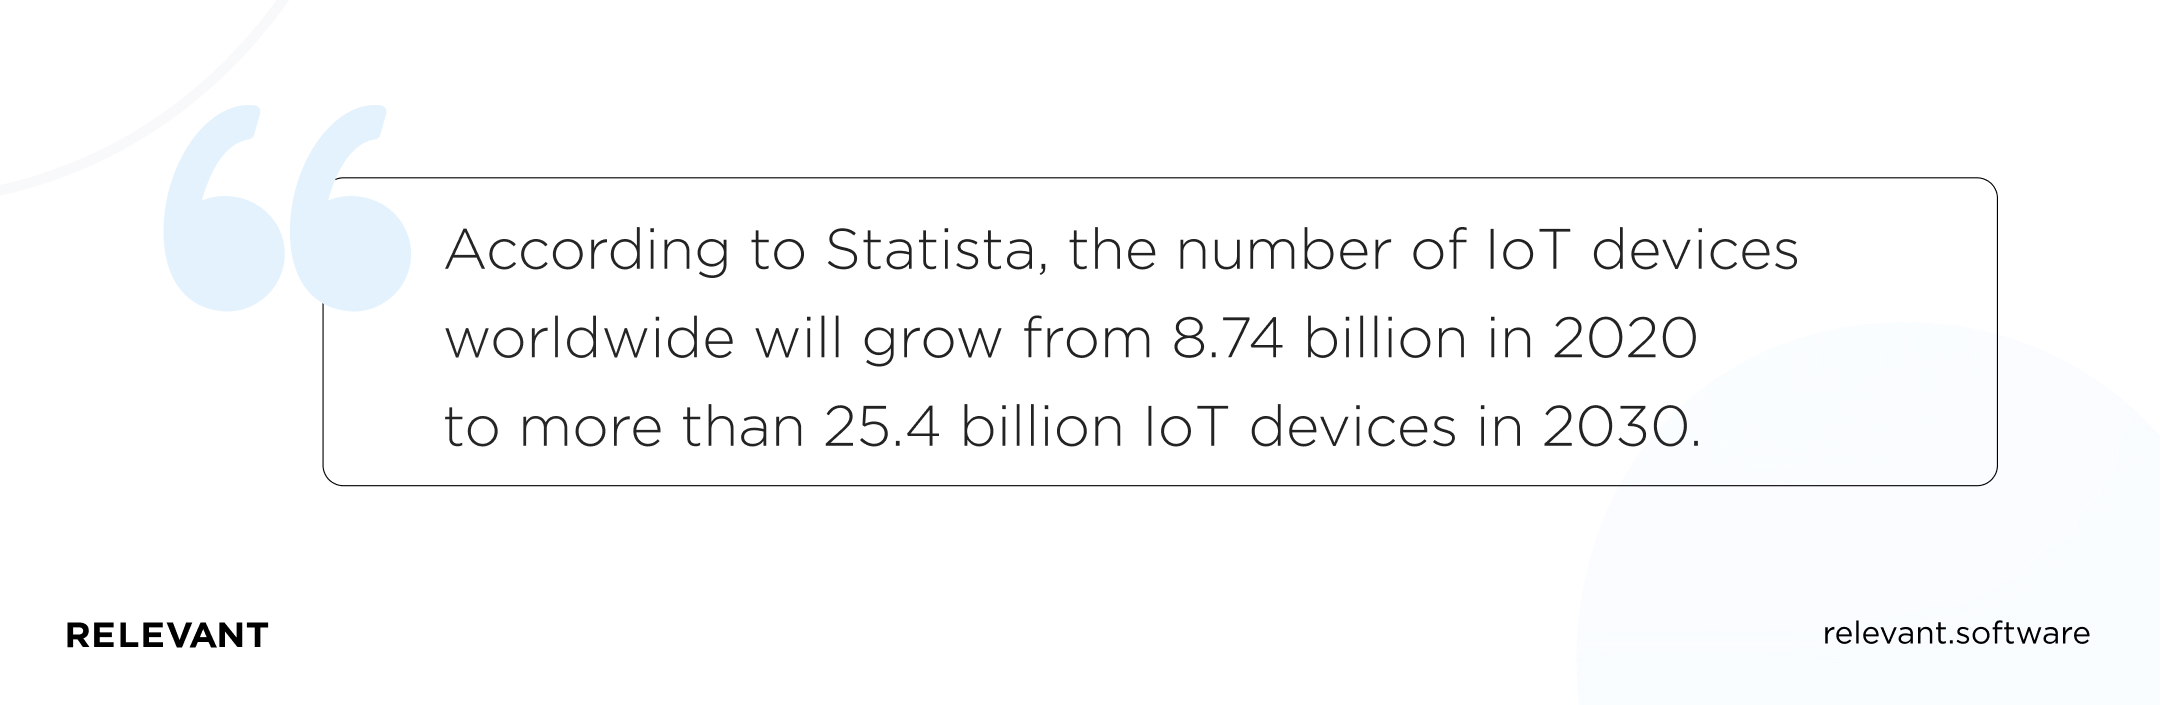 According to Statista, the number of IoT devices worldwide will grow from 8.74 billion in 2020 to more than 25.4 billion IoT devices in 2030.